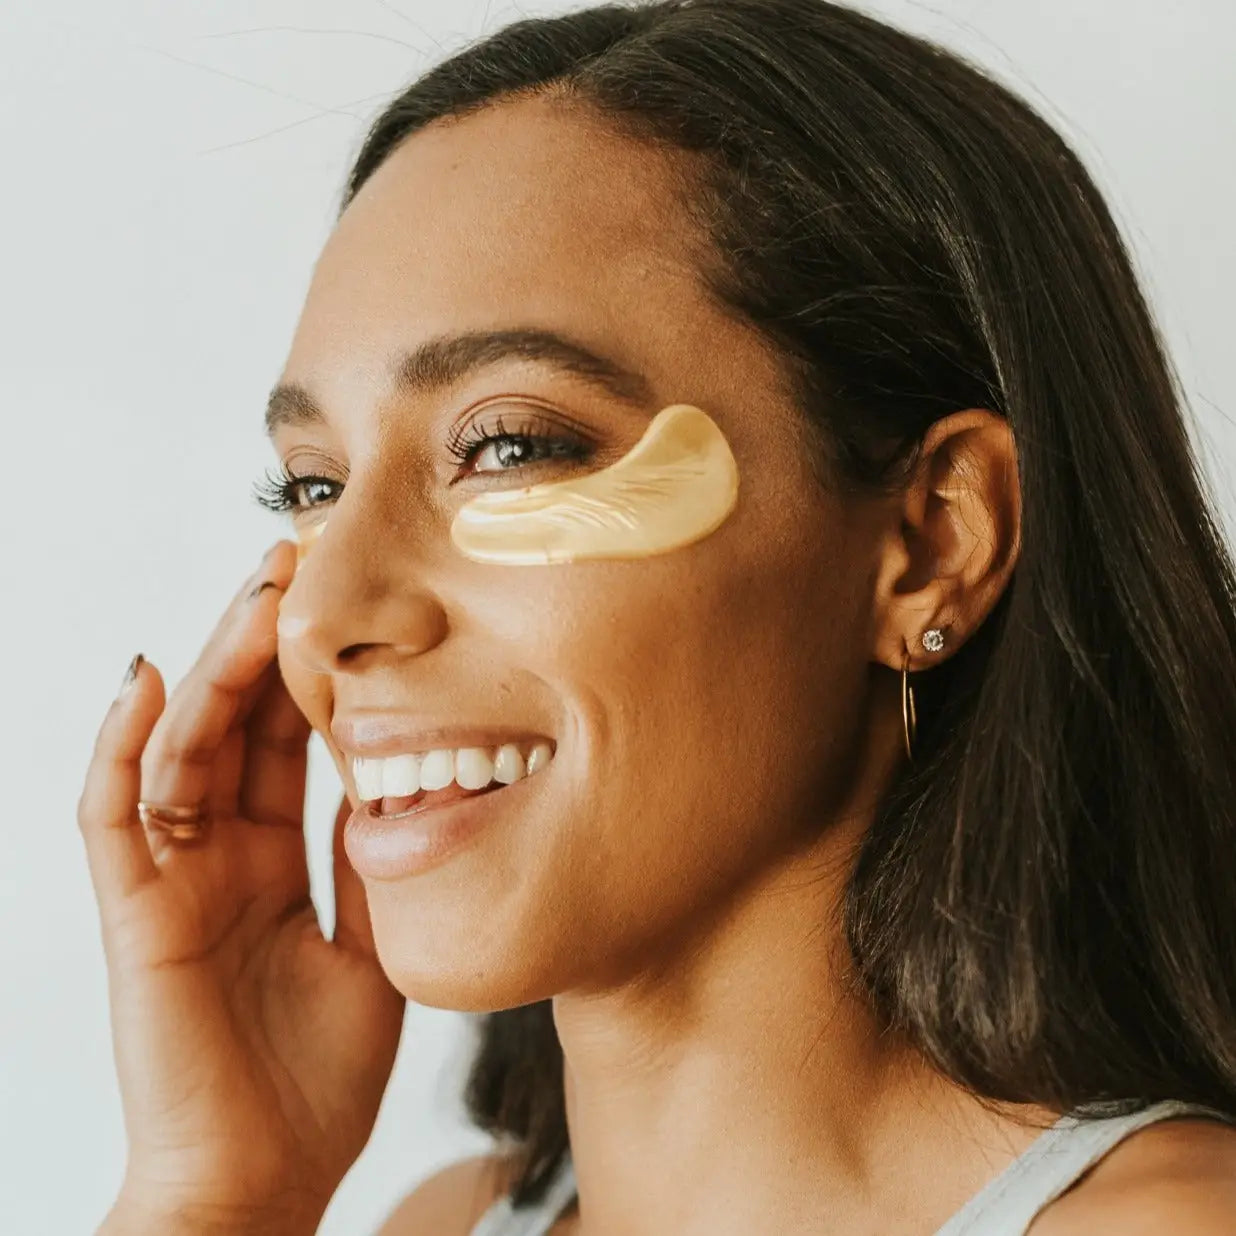 Woman Smiling with Gold eye mask on her under eyes